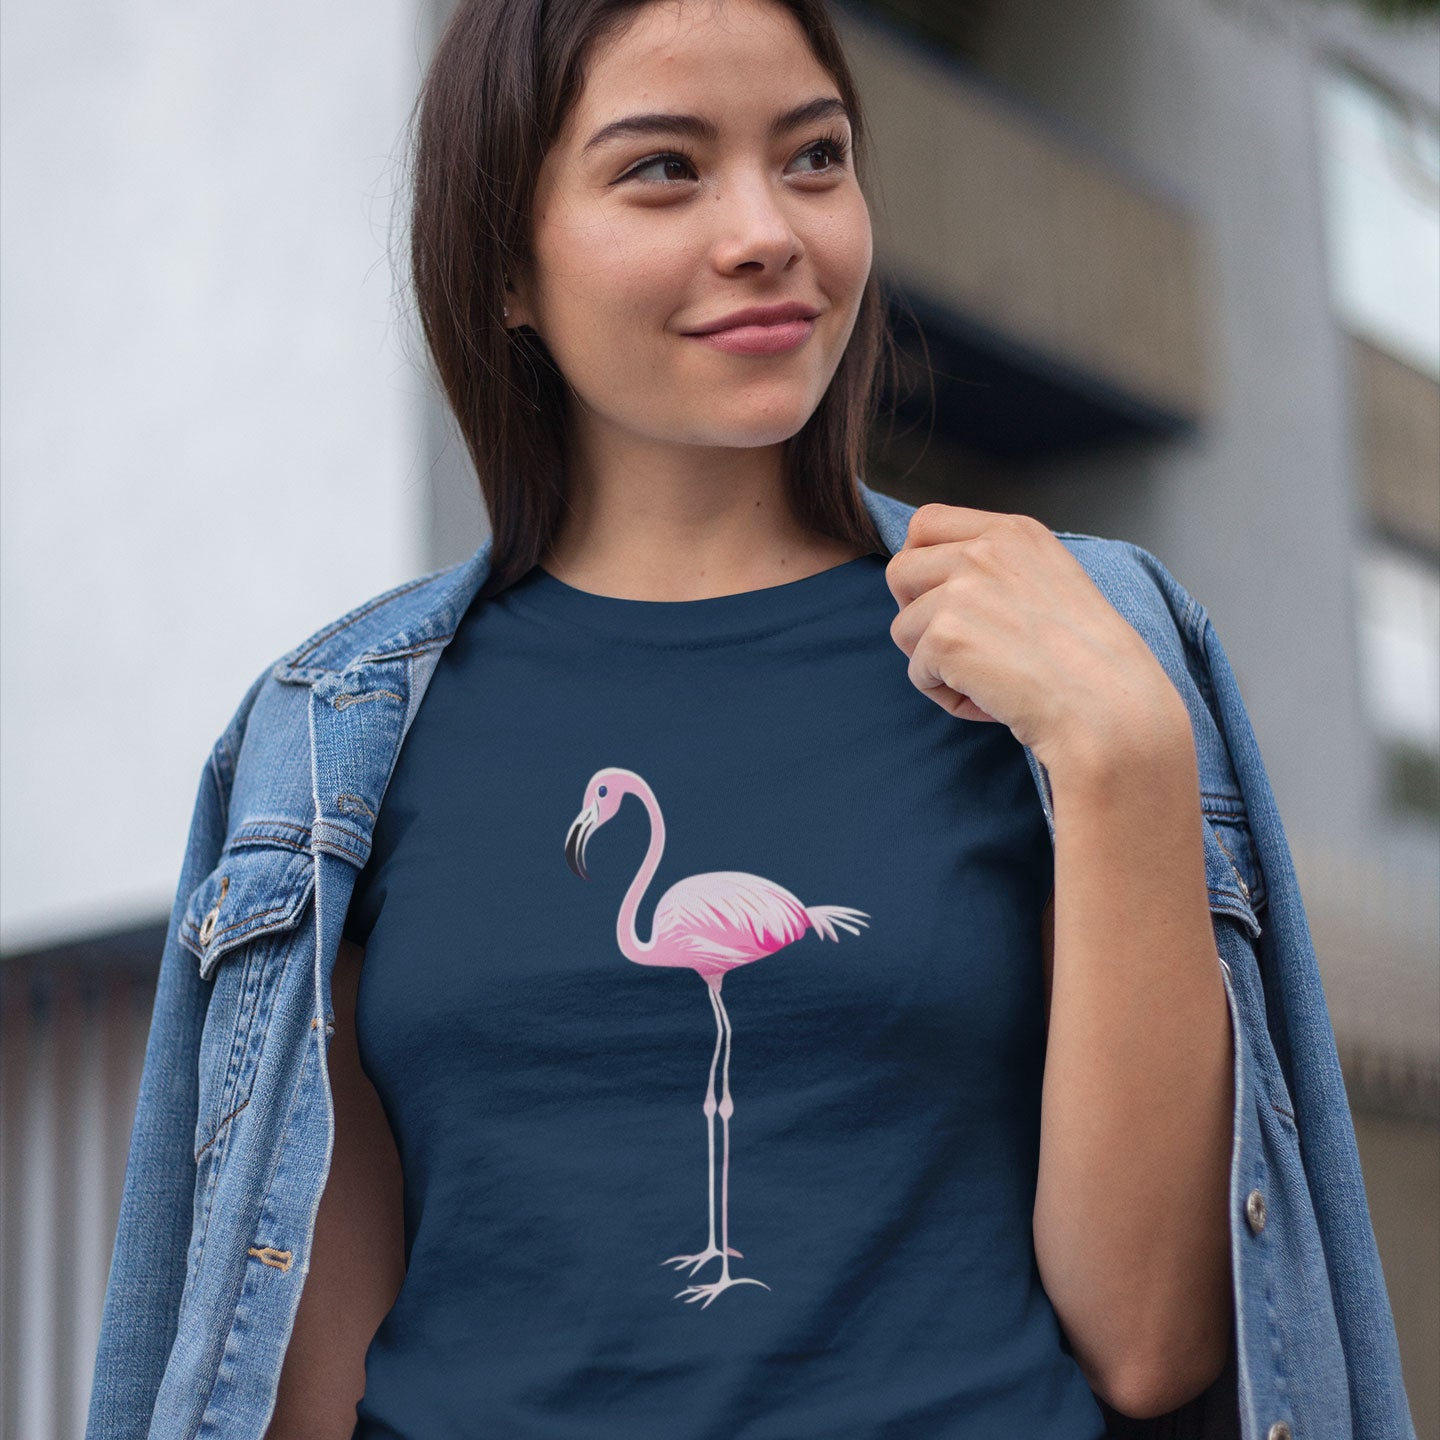 a woman wearing a denim jacket over a navy blue t-shirt with a pink flamingo print